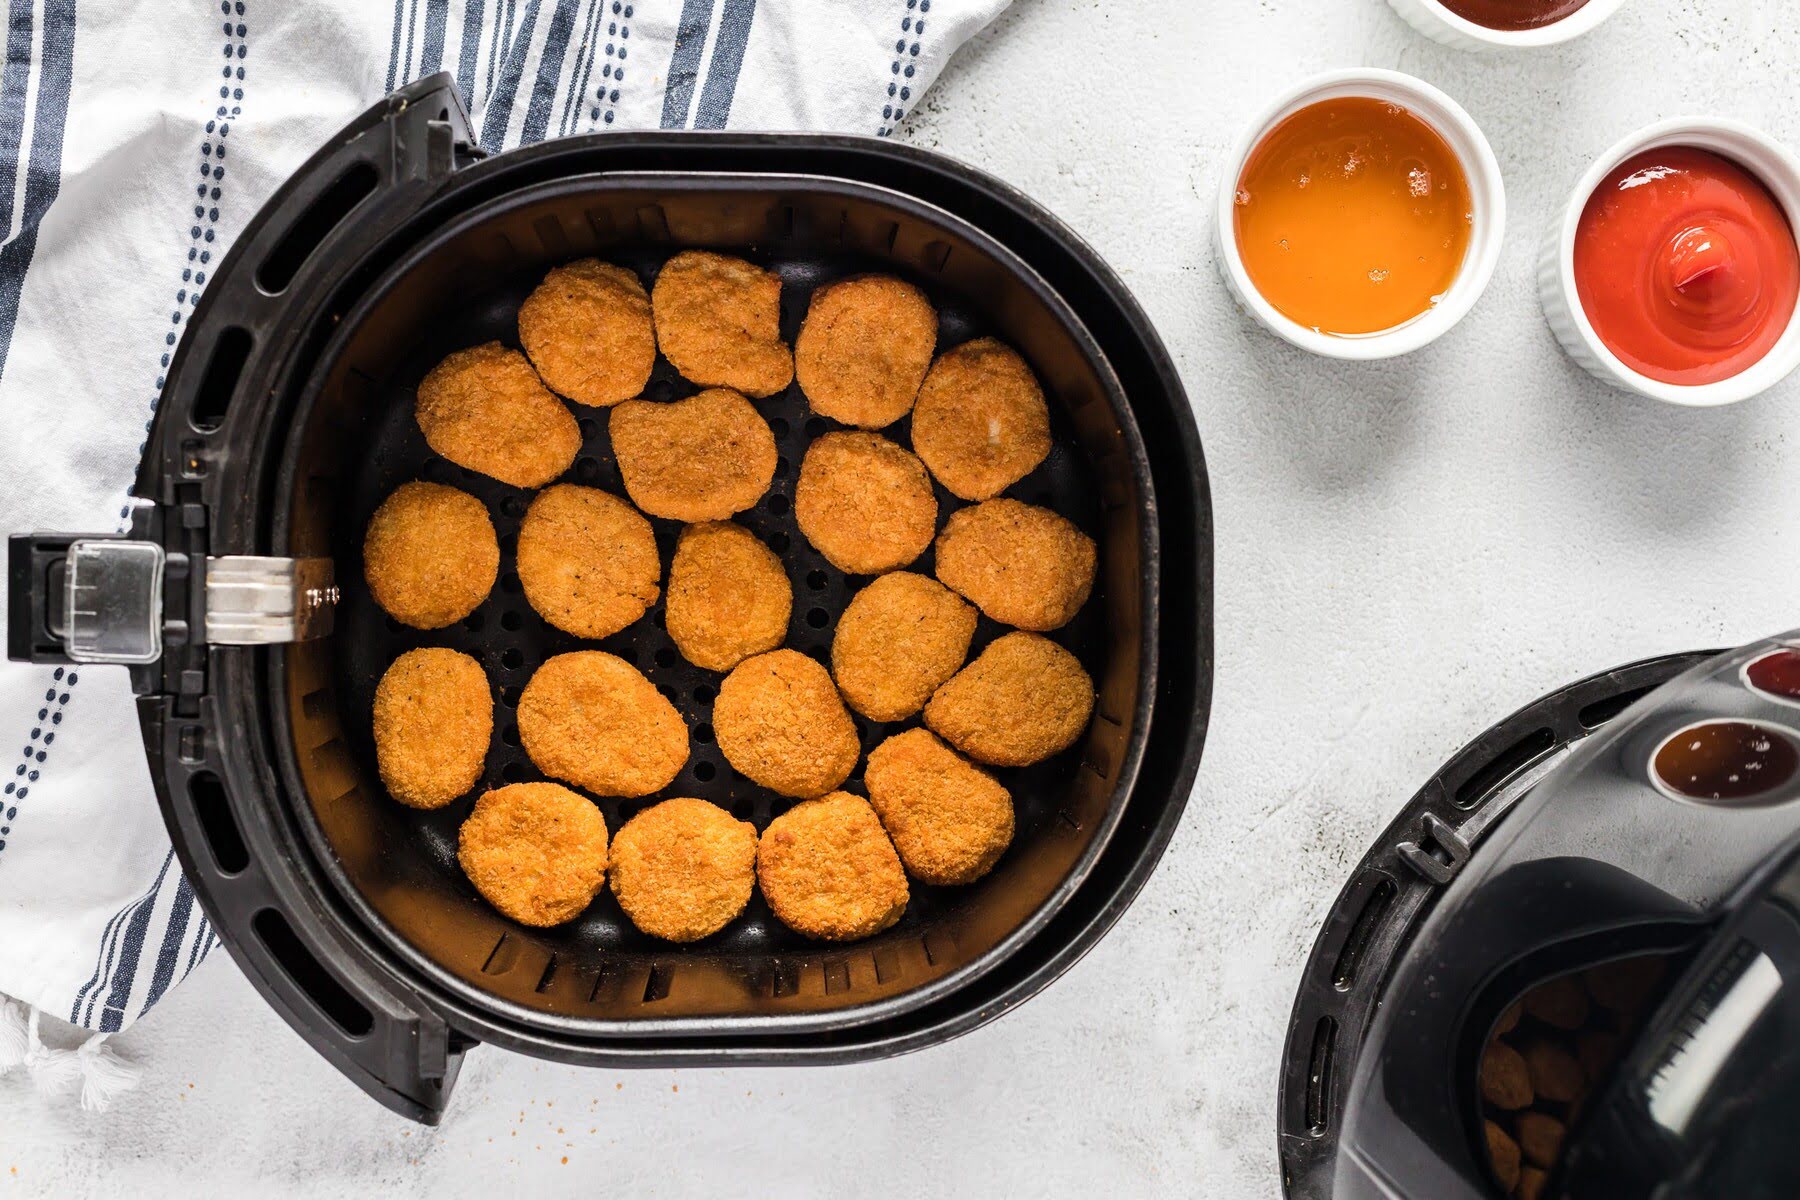 How Long Do You Cook Frozen Chicken Nuggets In An Air Fryer